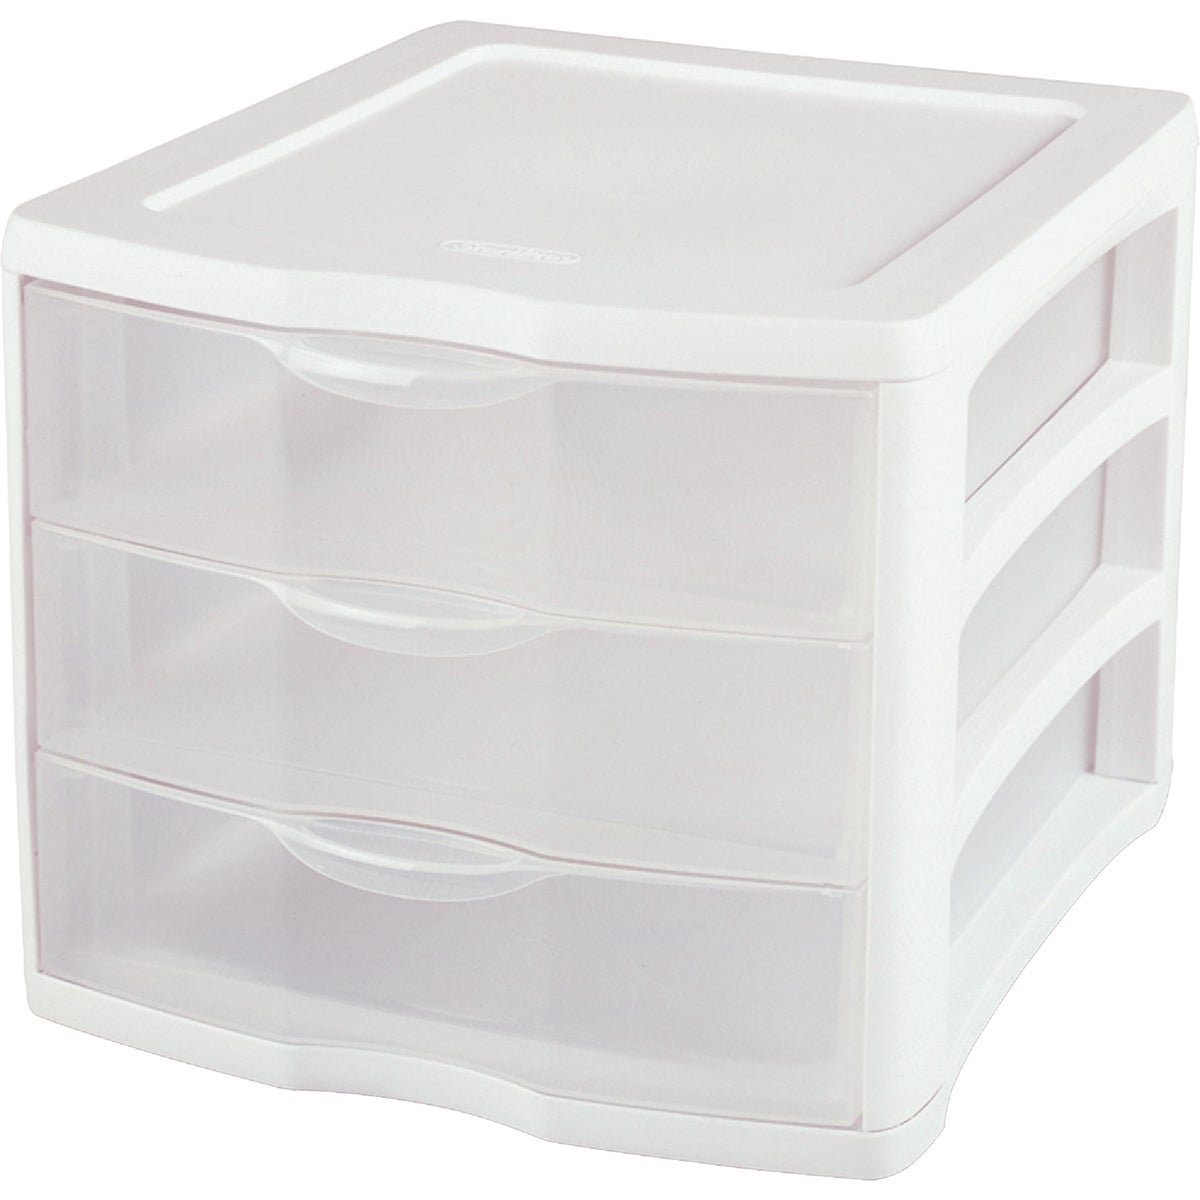 Item 601165, Storage drawers feature a large viewing window for easy identification of 